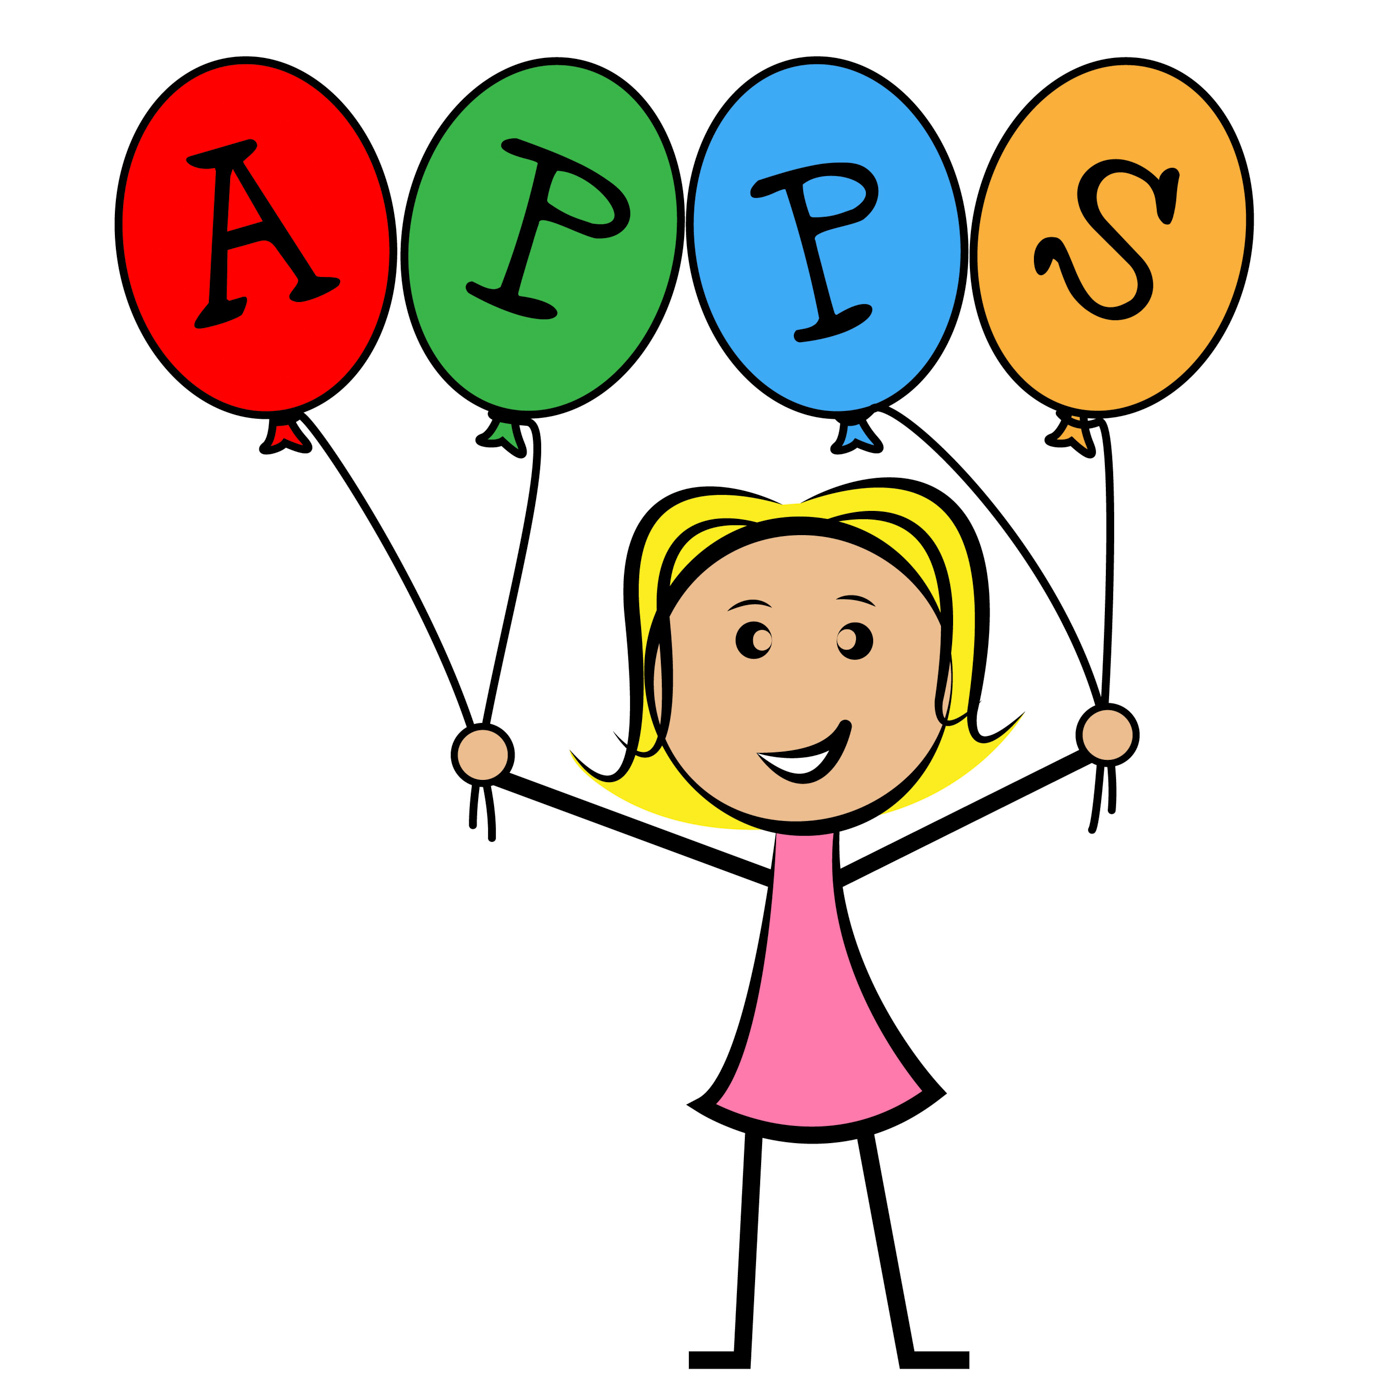 Apps balloons represents application software and kids photo